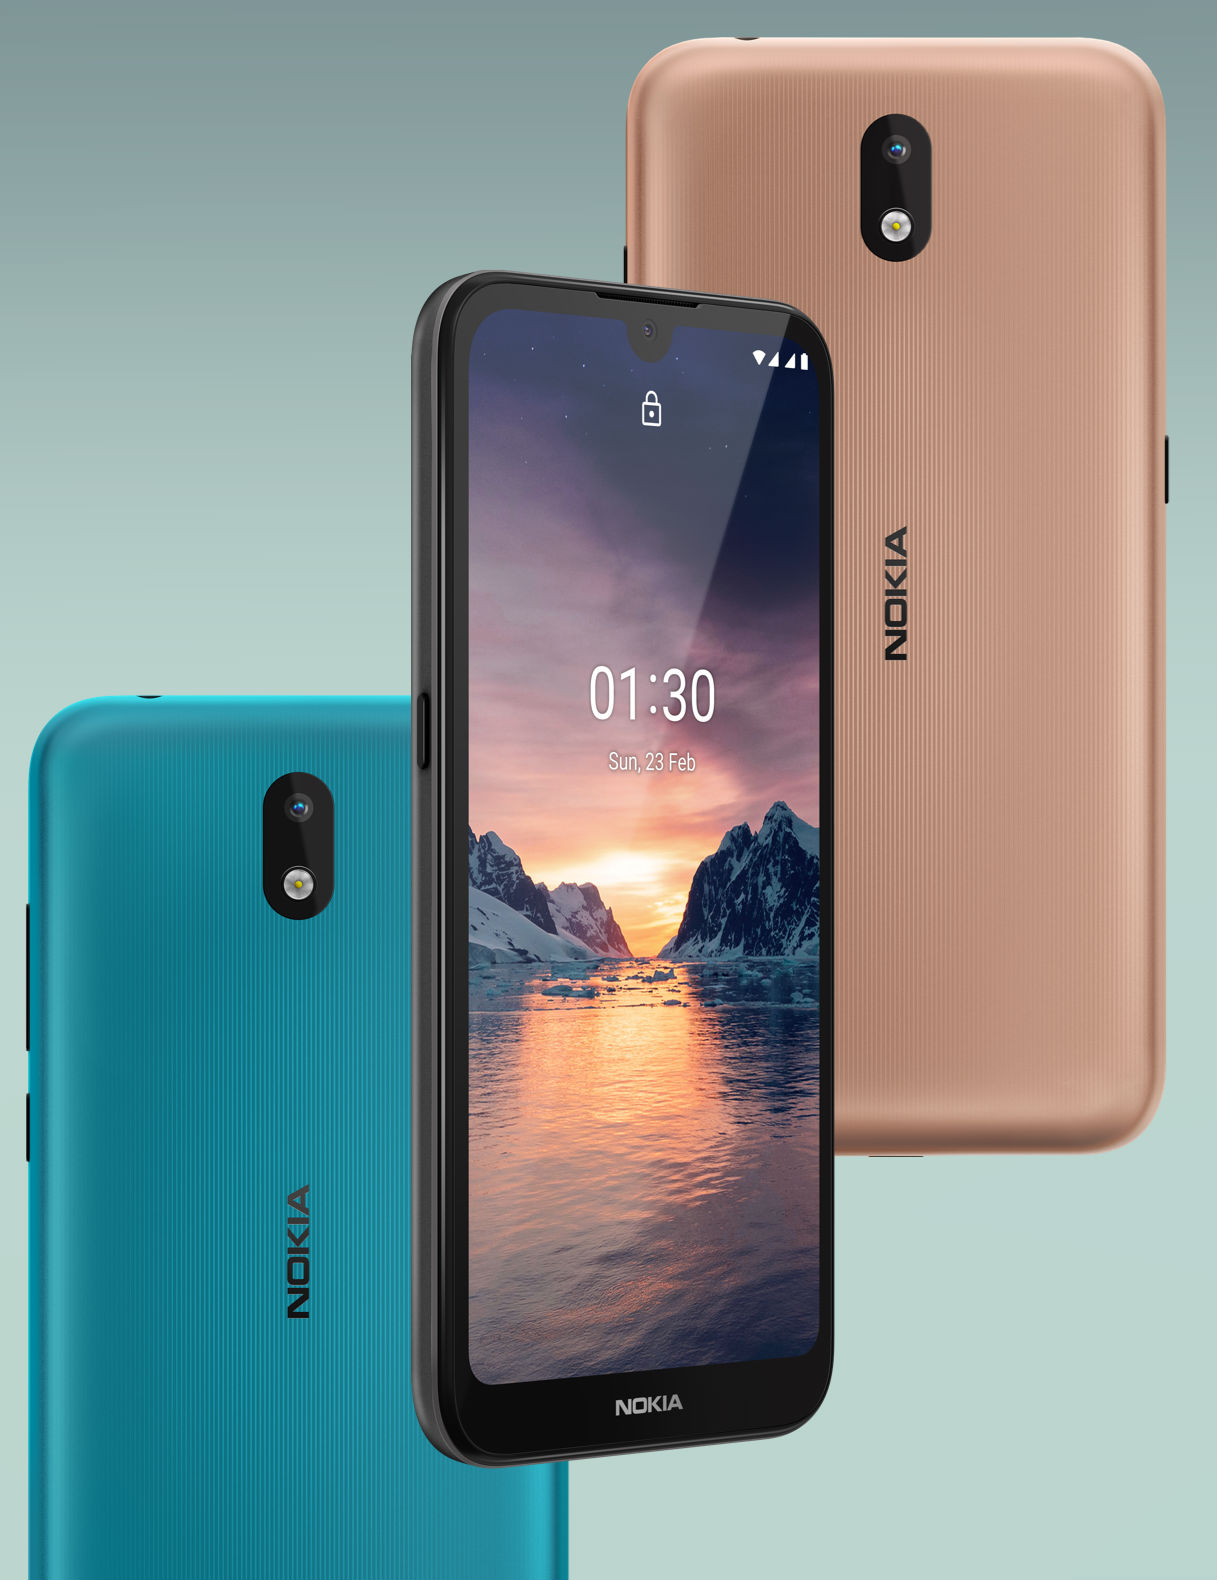 Review of the Nokia 1.3 smartphone with the main characteristics